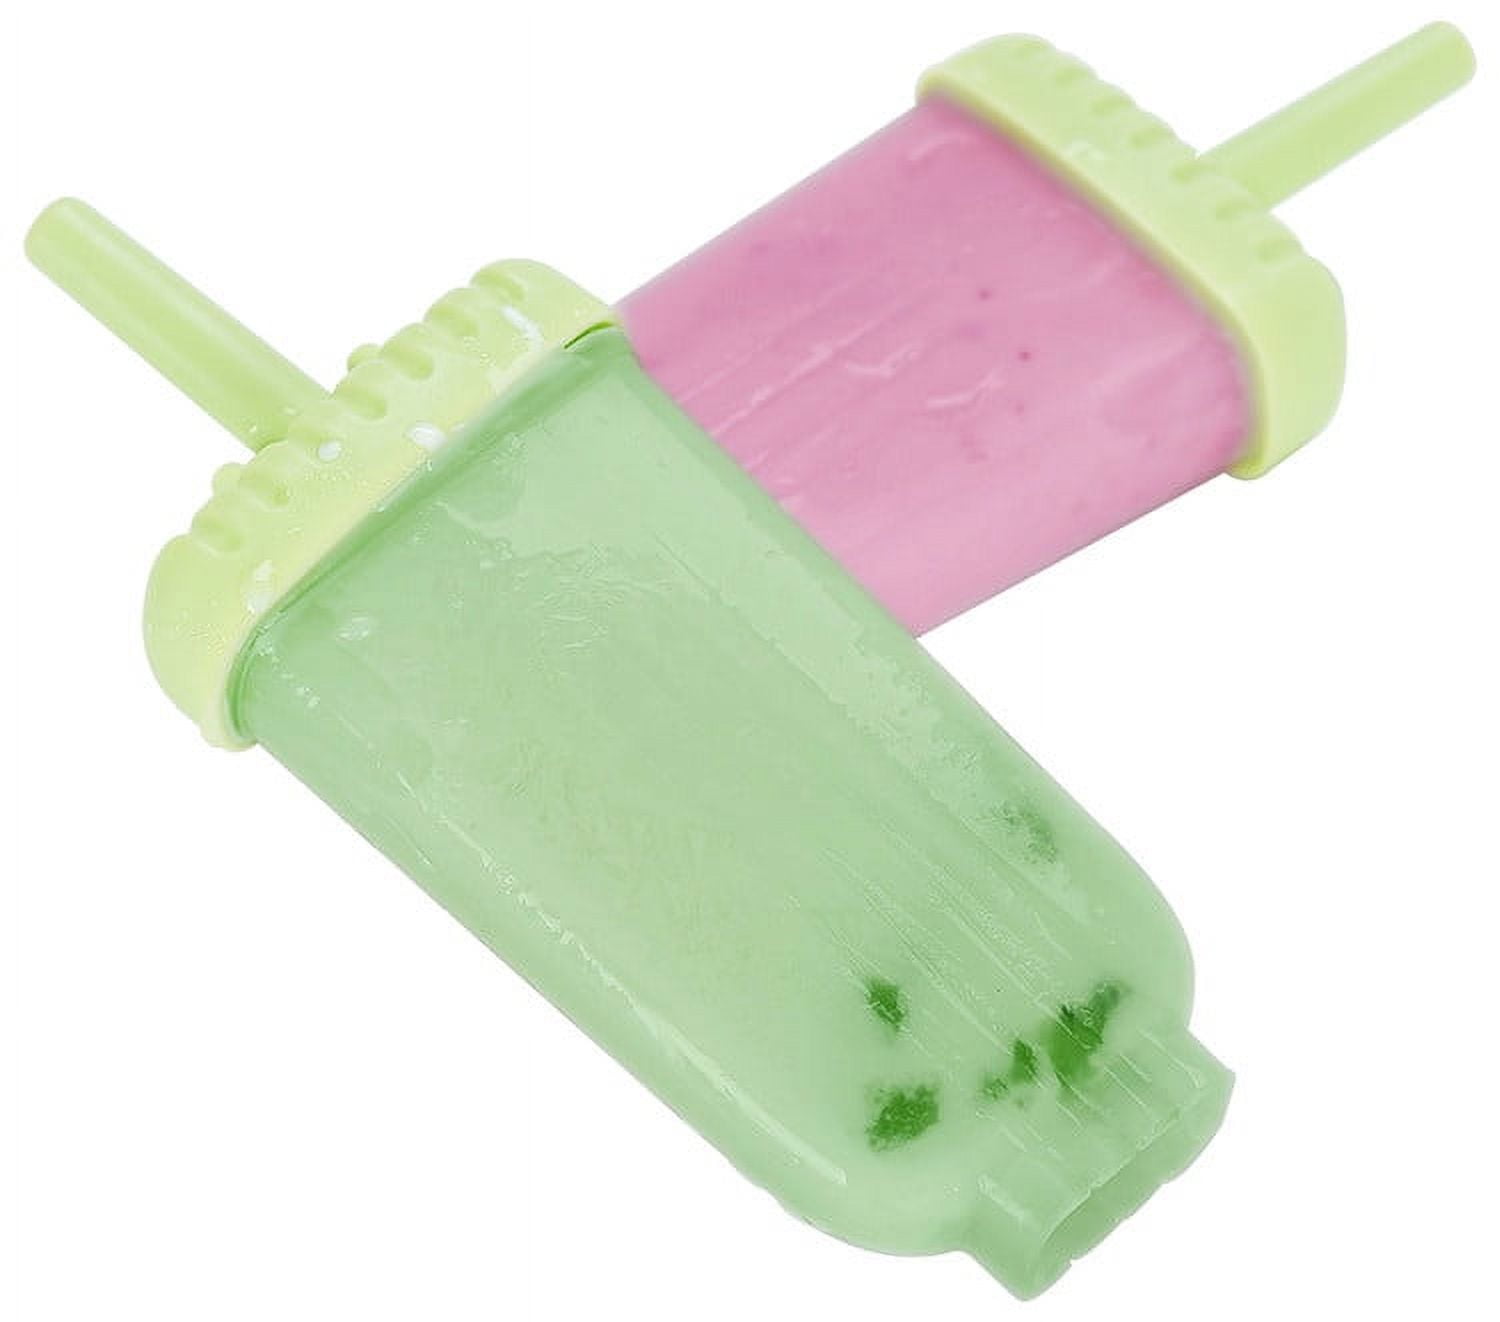 BAKHUK 3 Sets Ice Pop Molds Popsicle Molds Ice Pop Maker with Funnel and Brush, 3 Colors